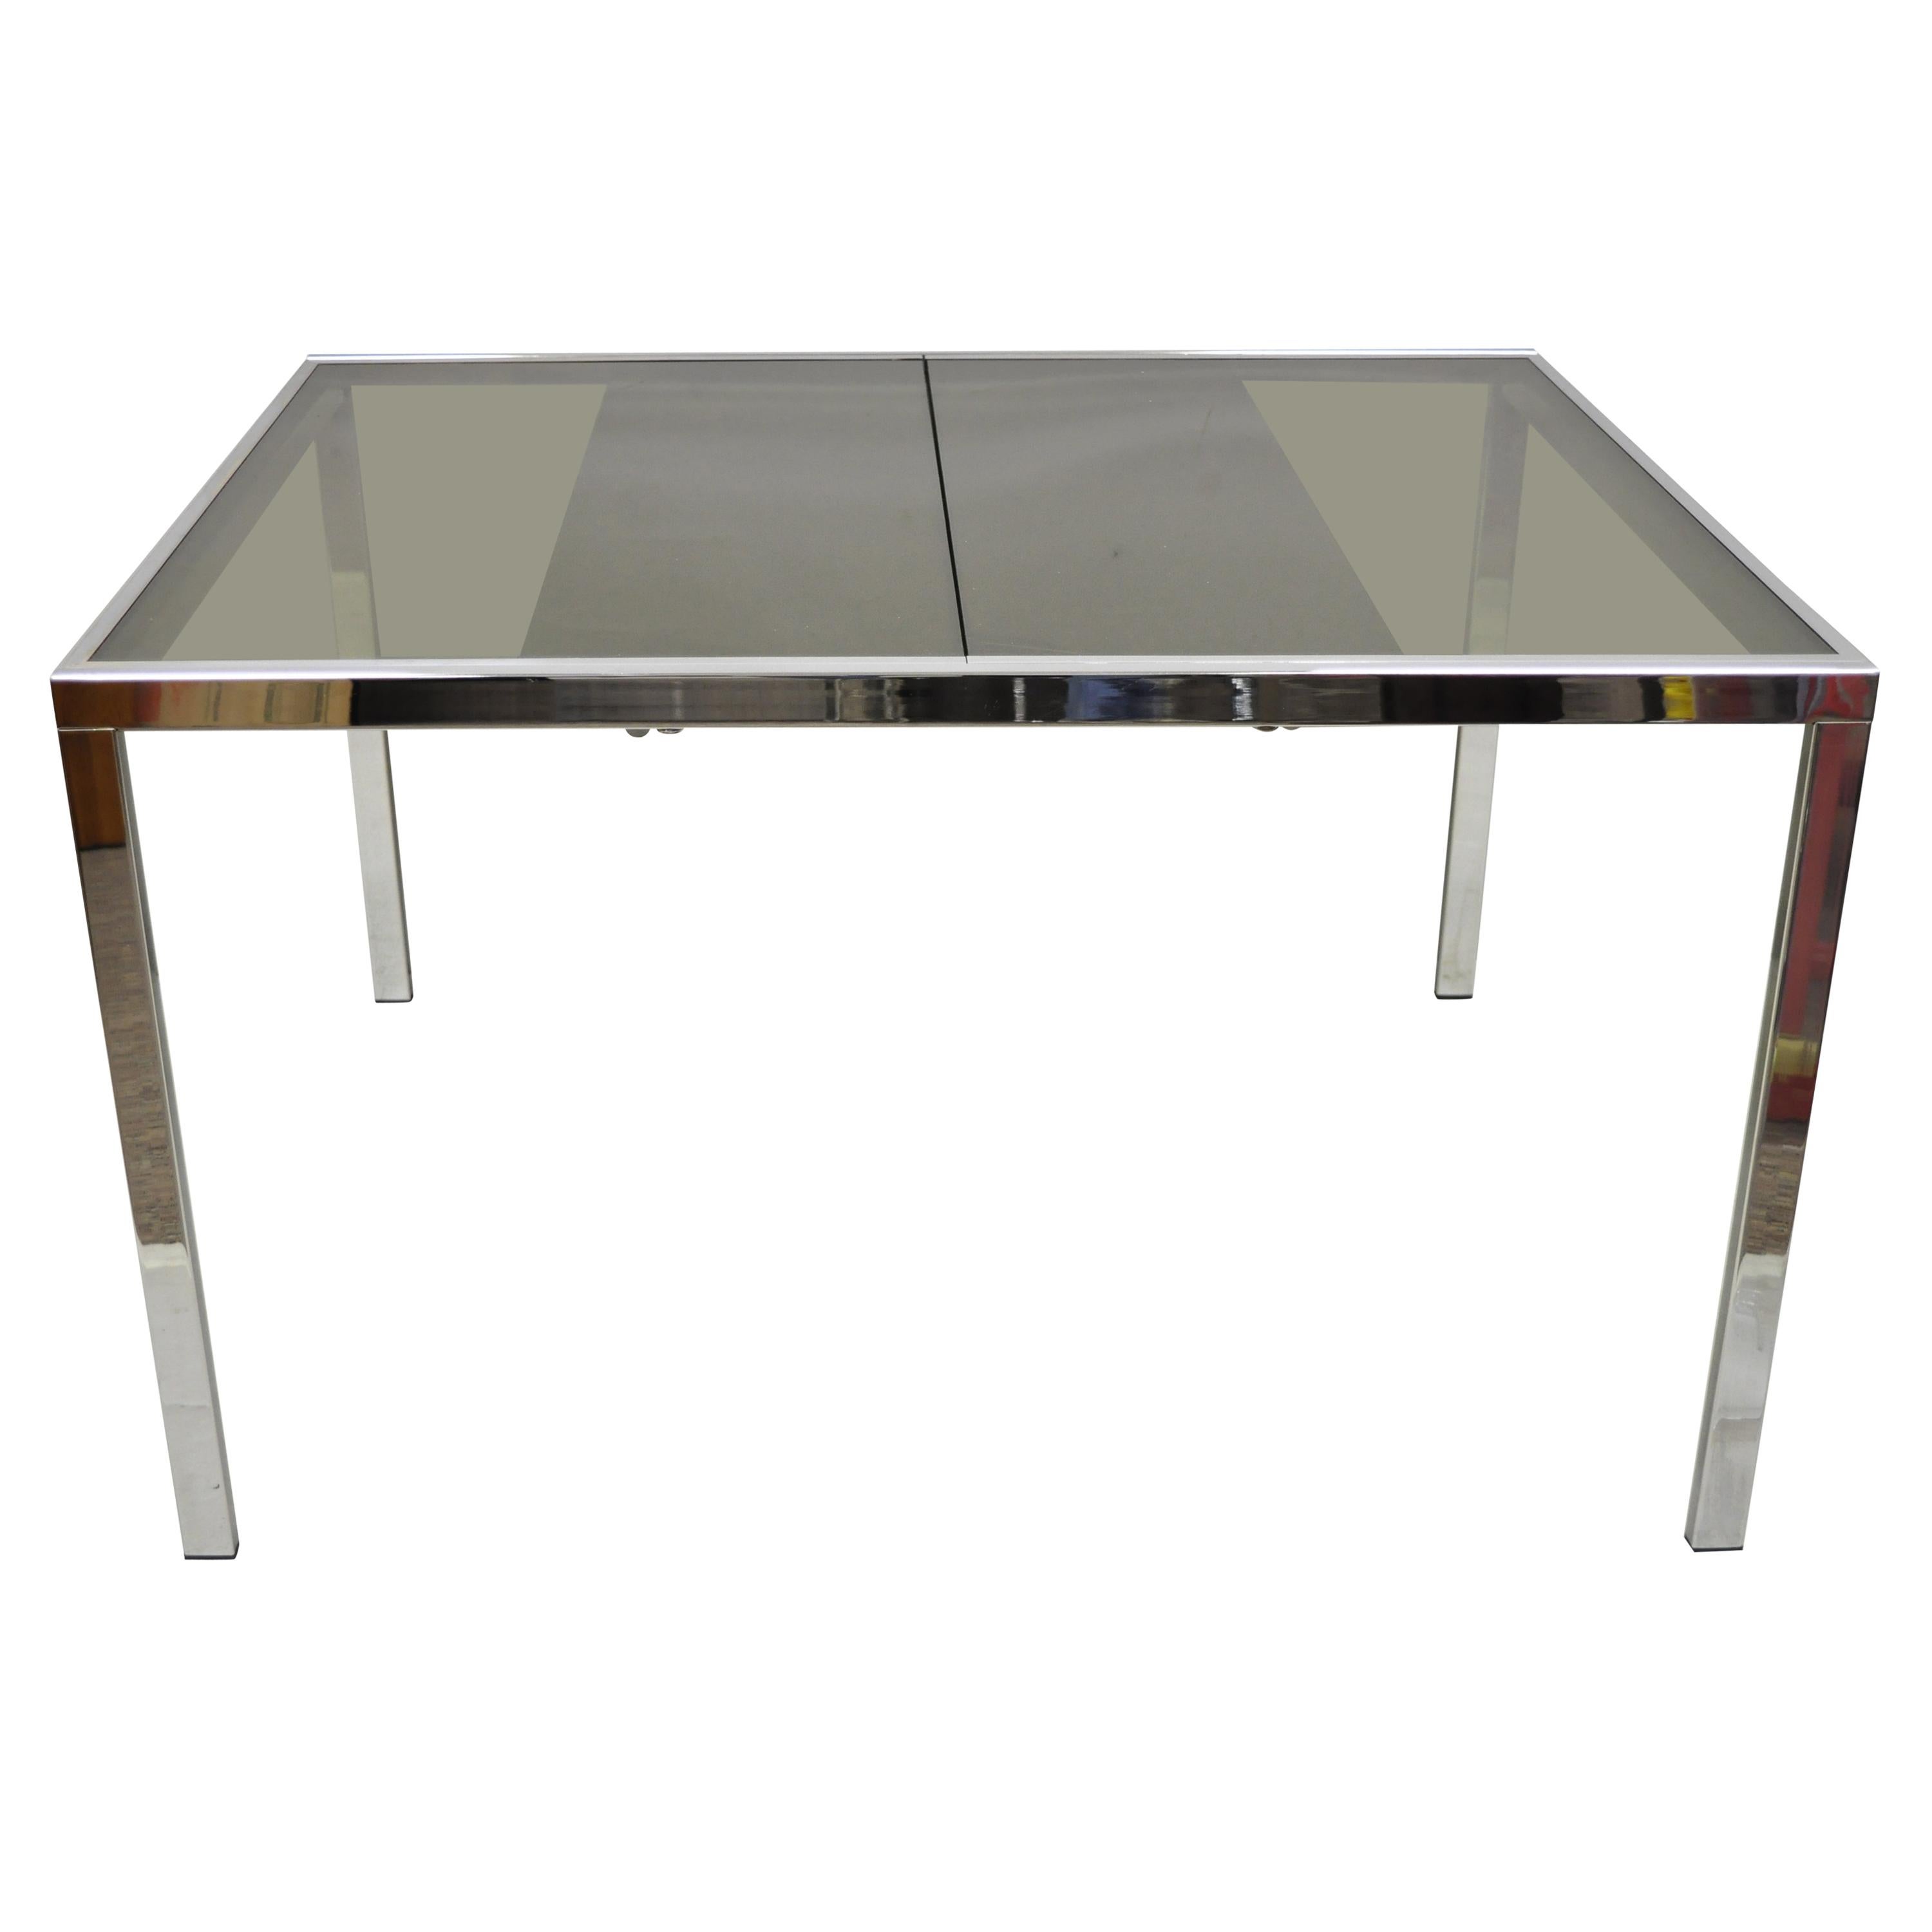 Midcentury Italian Modern Chrome and Glass Extension Dining Table For Sale